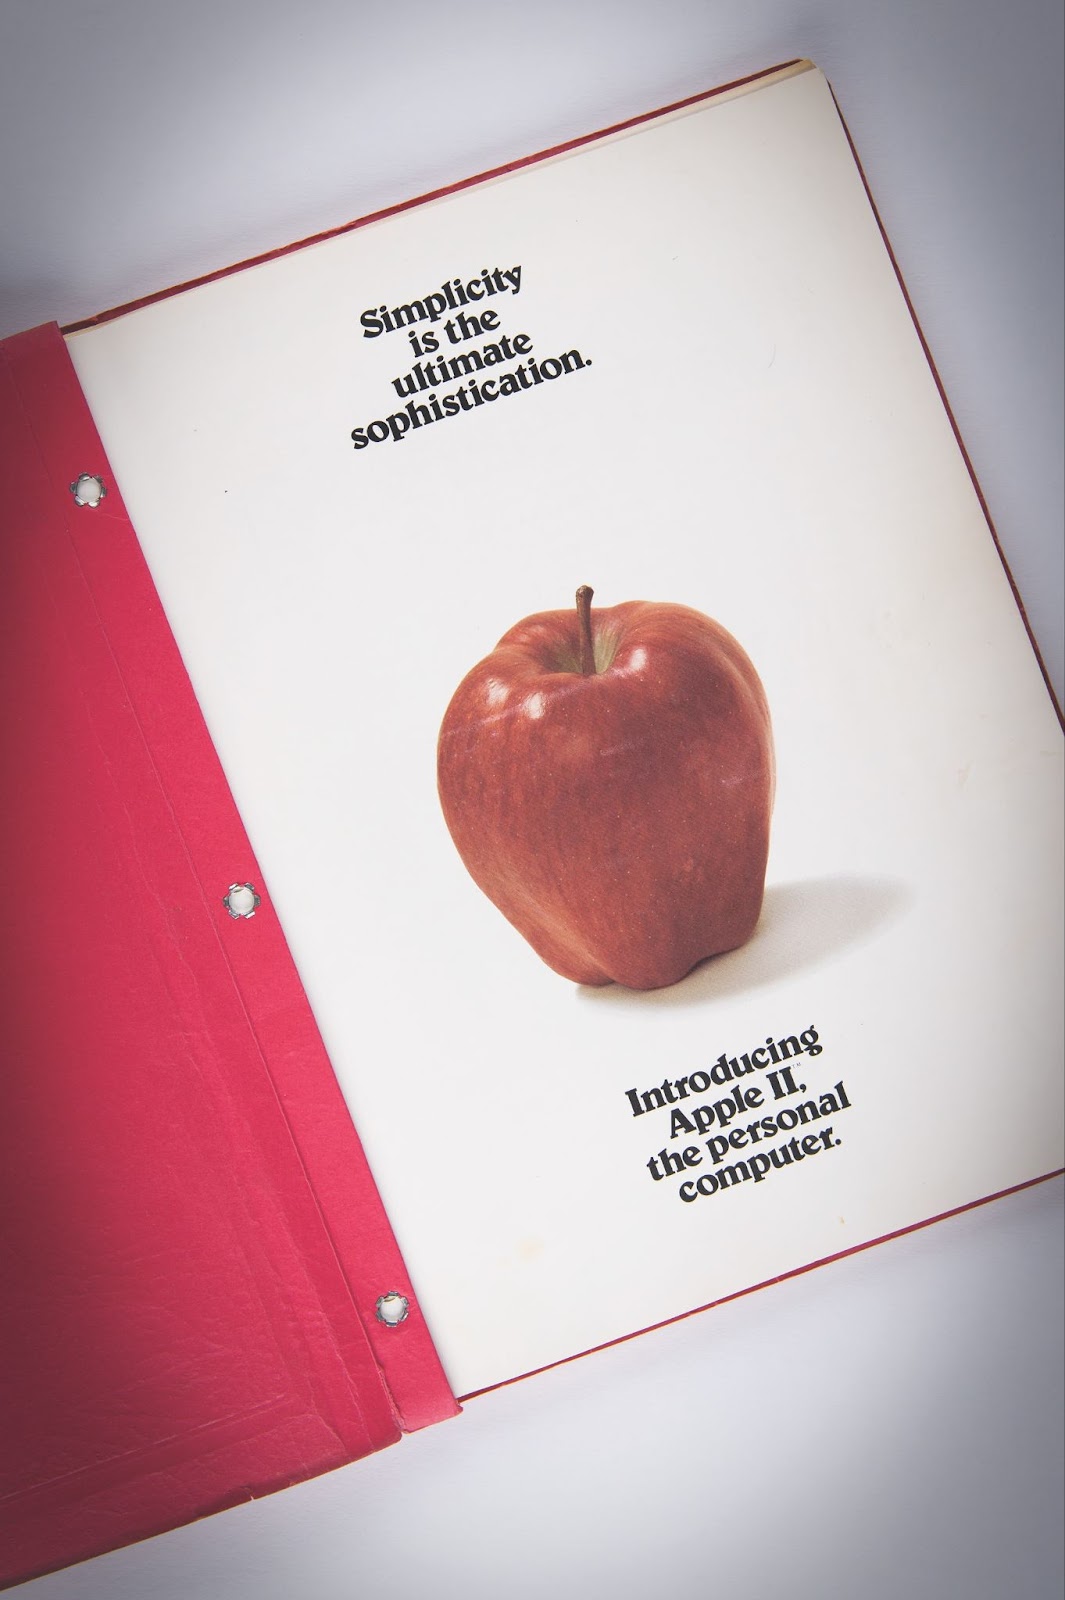 Original Apple II manual from Allan Alcorn’s collection, given to him personally by Steve Jobs and Steve Wozniak.